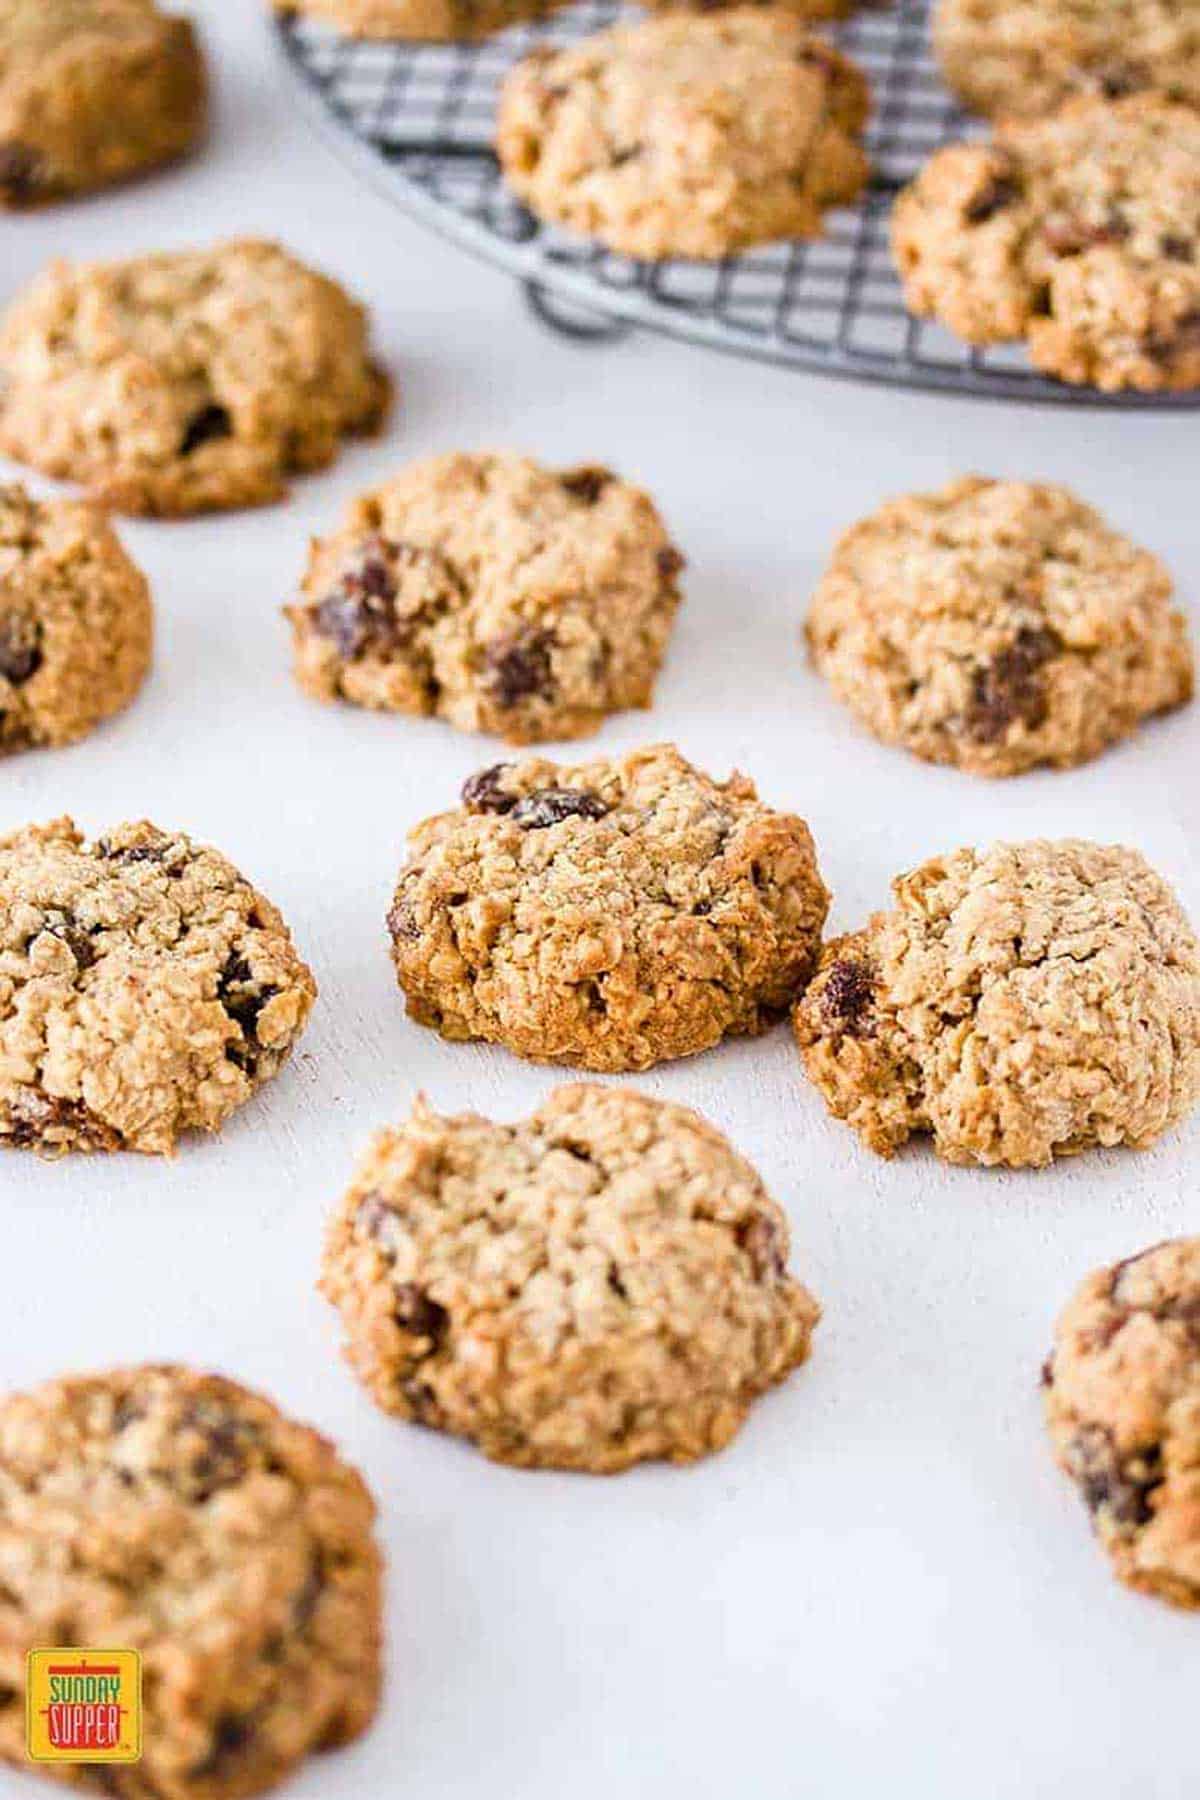 Oatmeal raisin cookies on a white surface, some on a metal rack